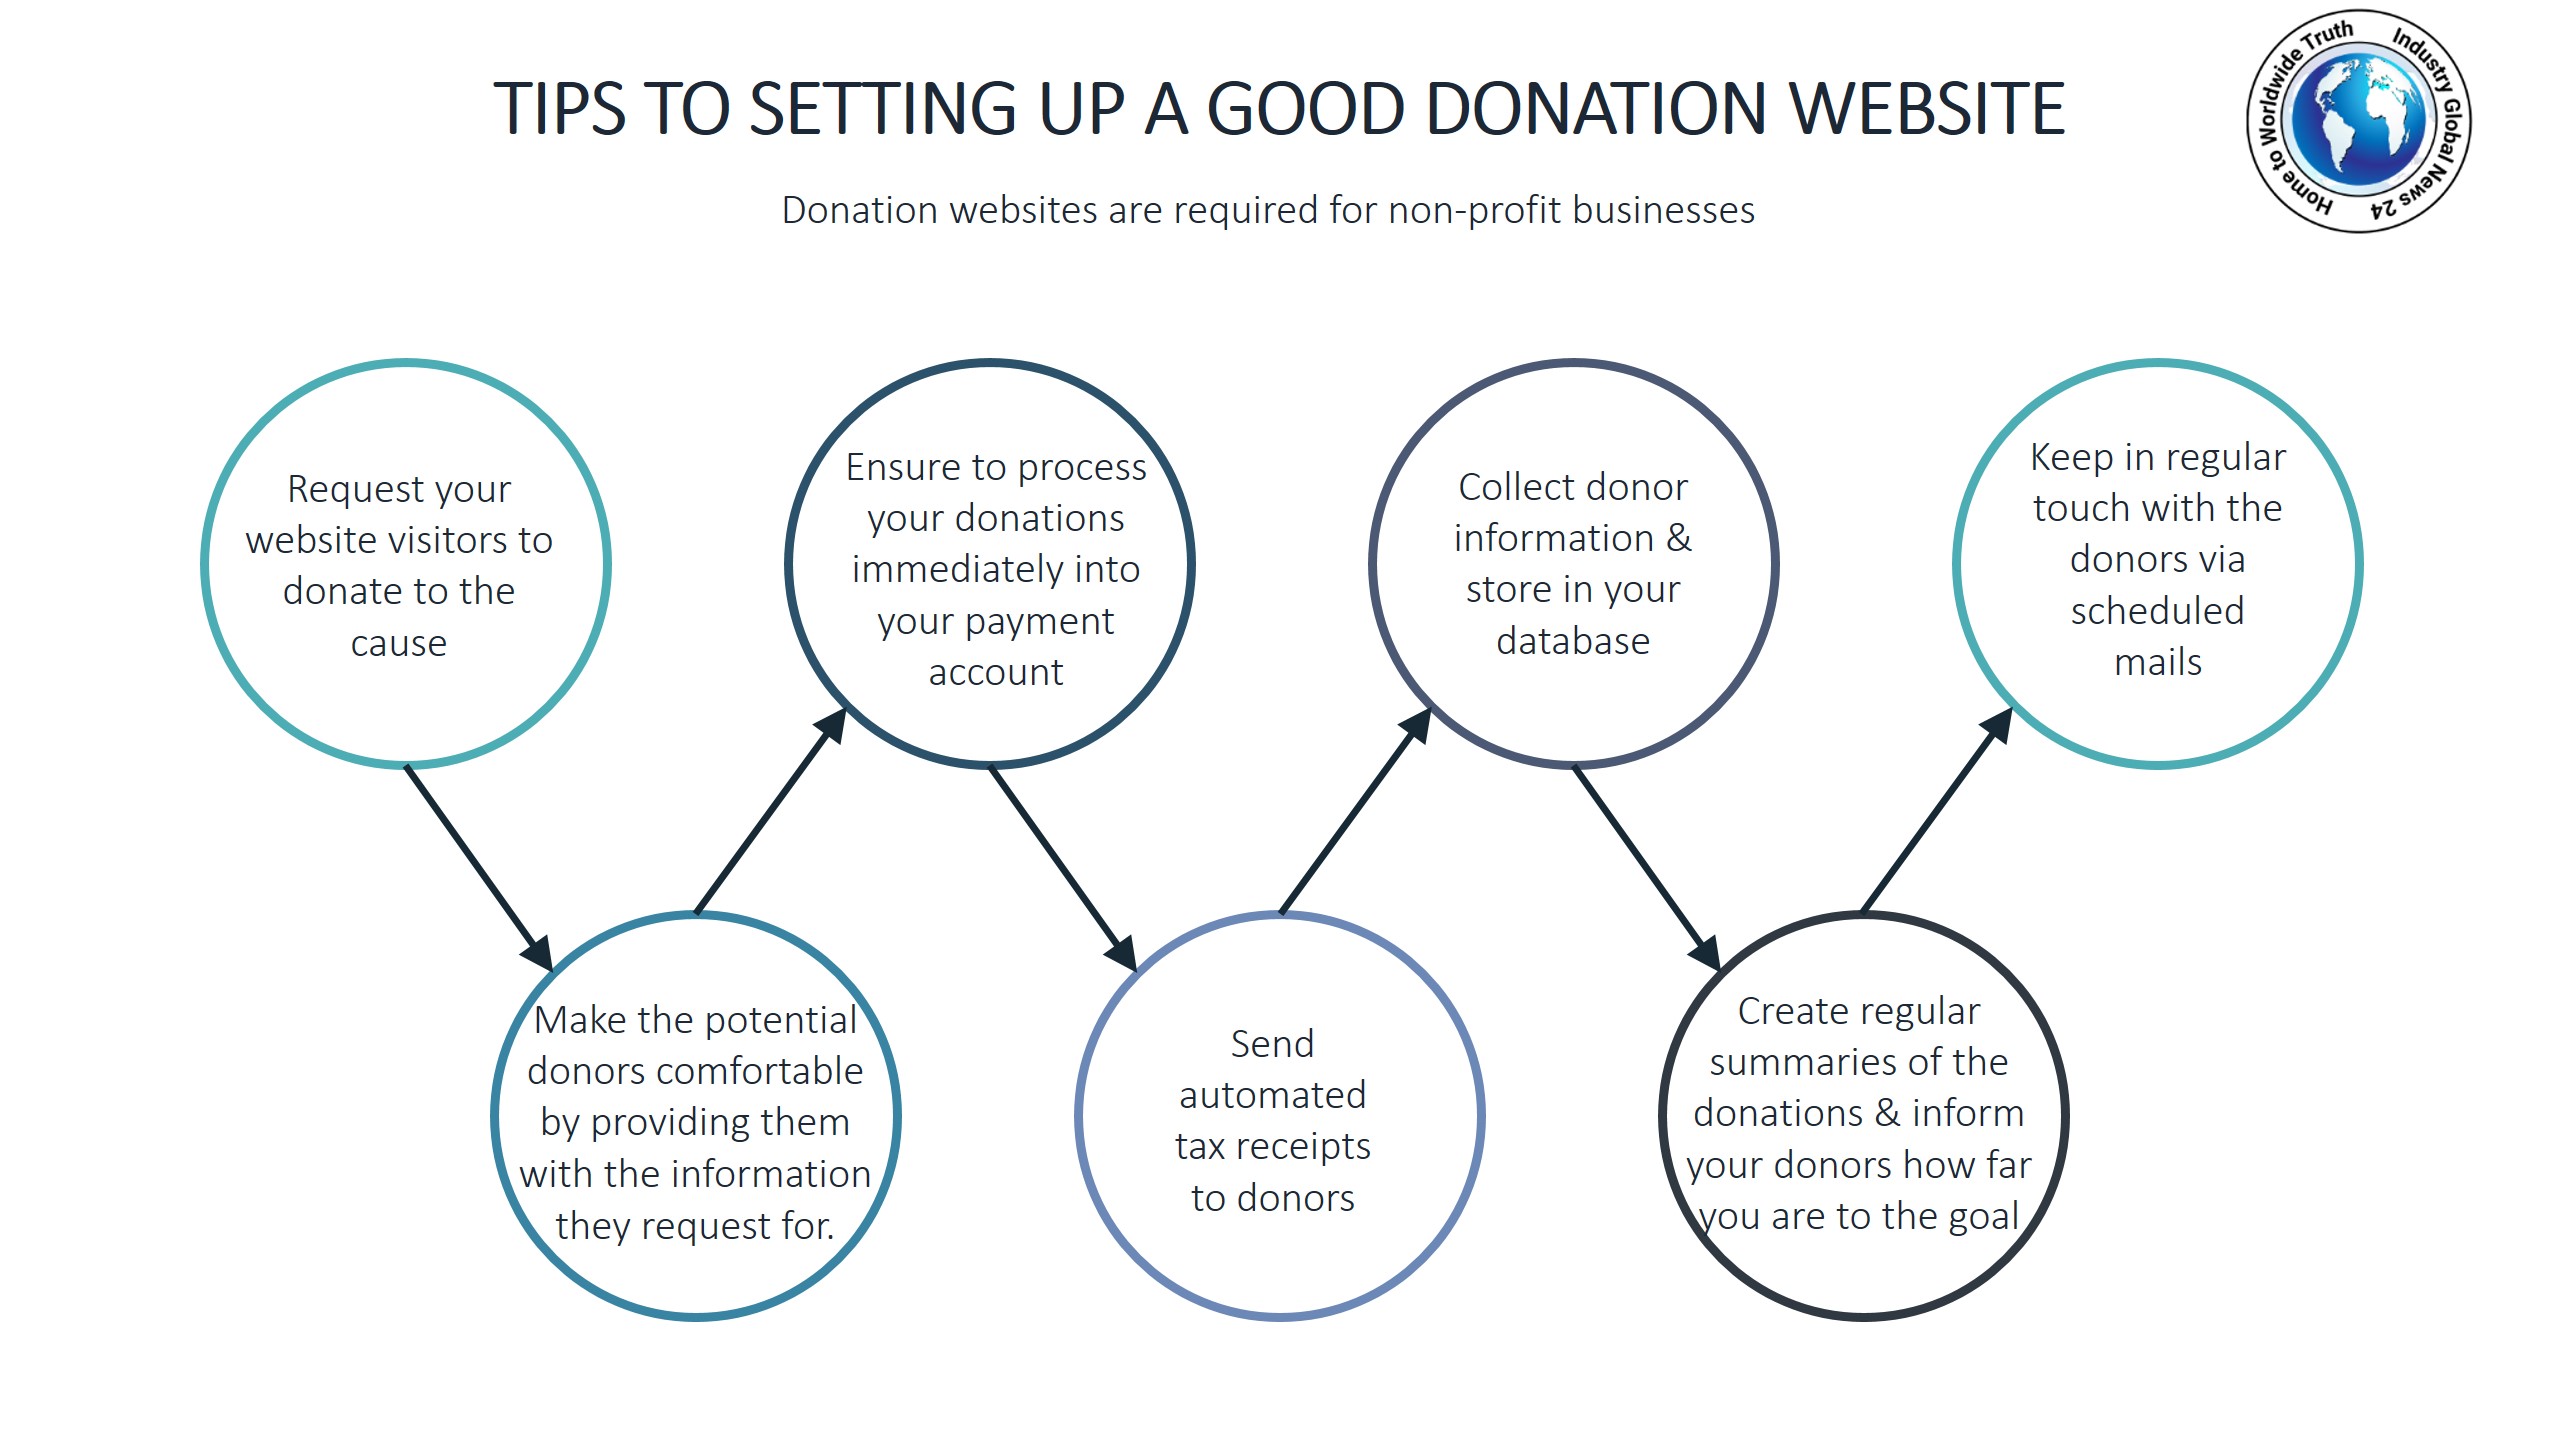 Tips to setting up a good donation website